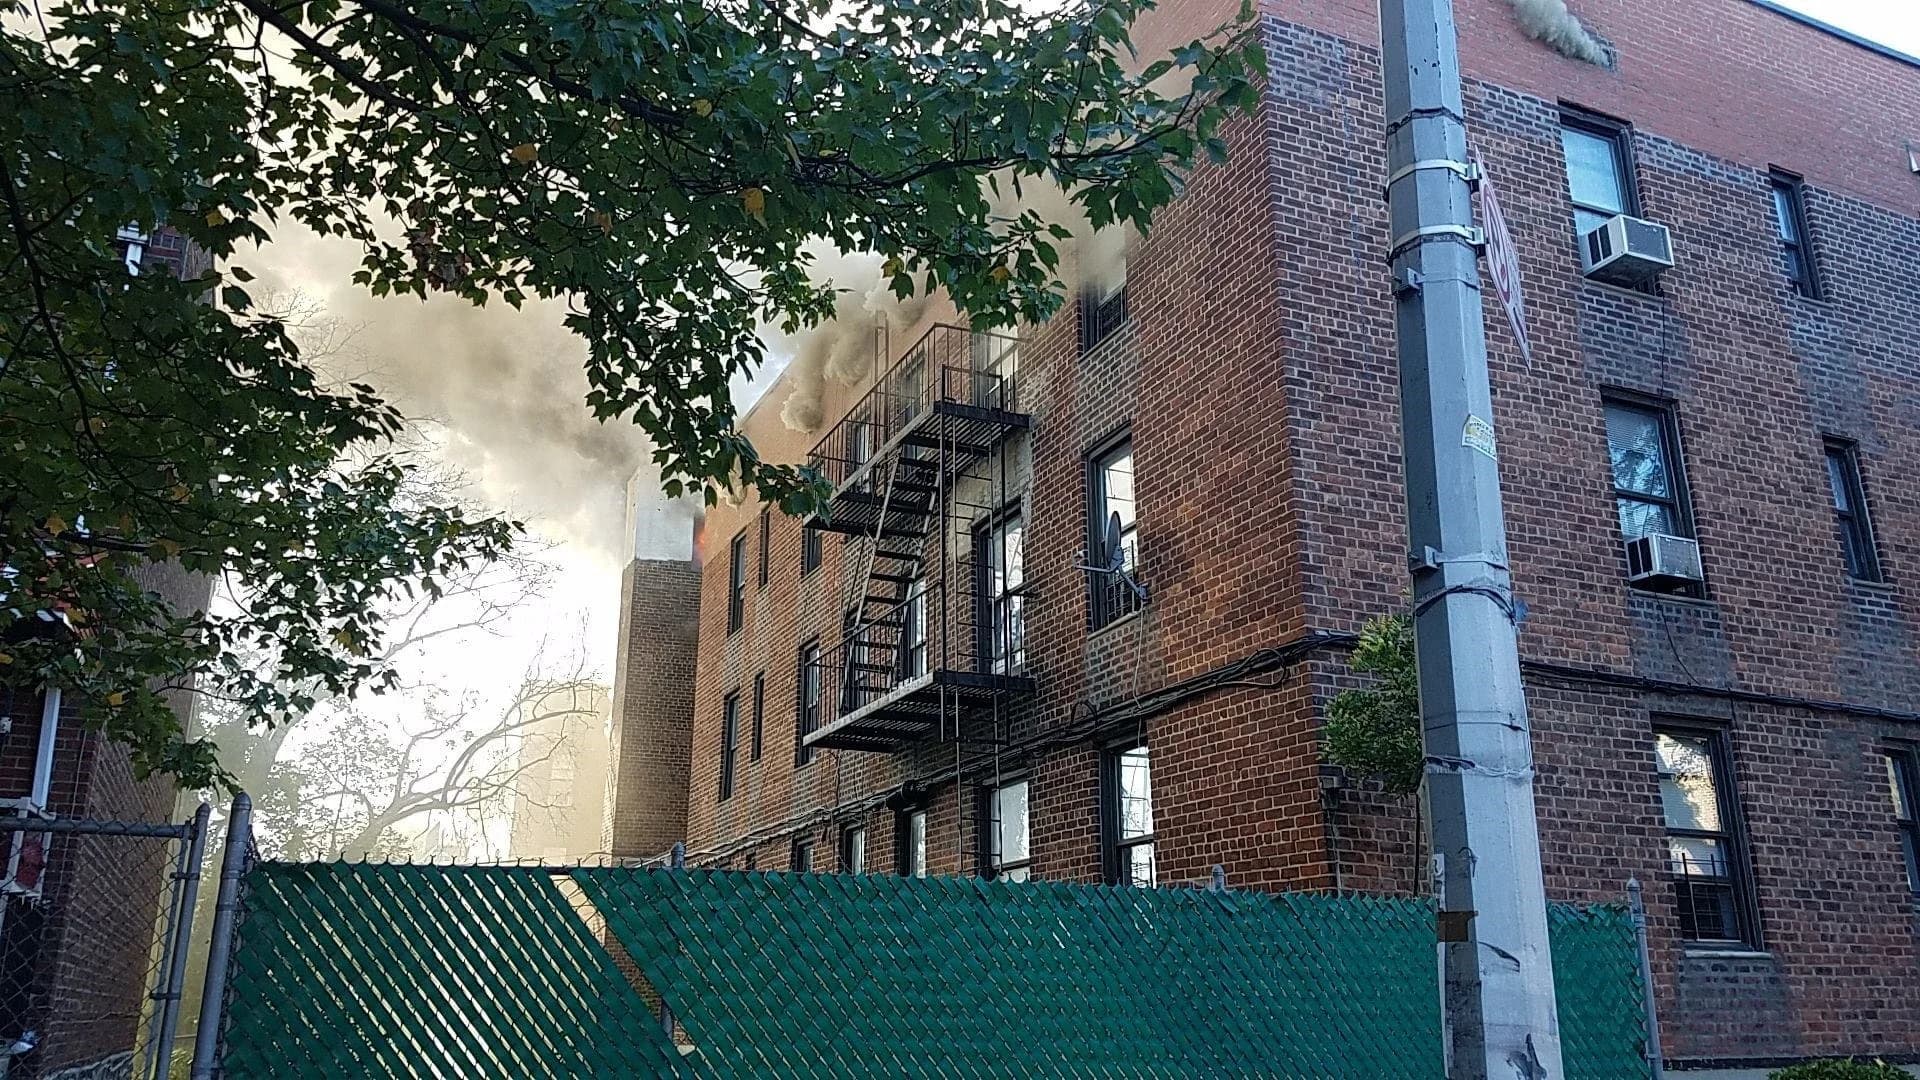 Dozens of families displaced after 5-alarm fire in Soundview